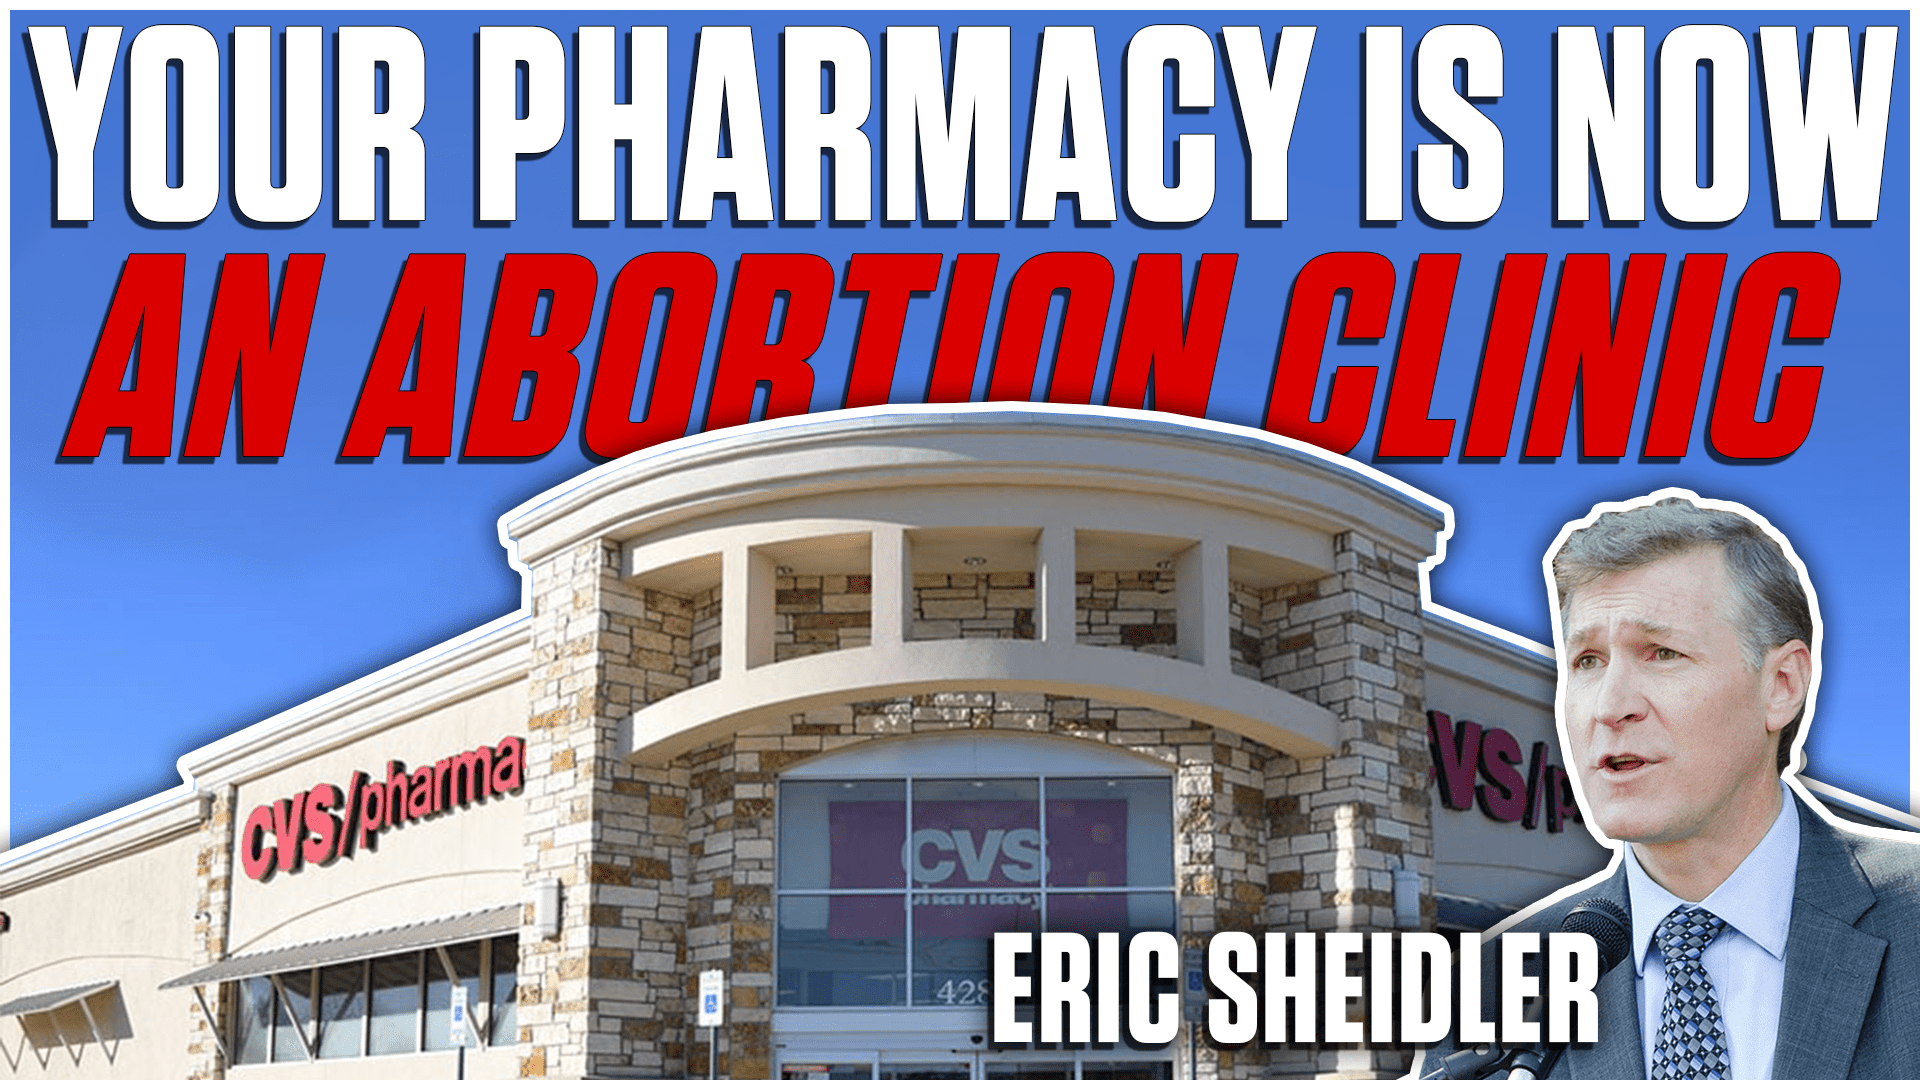 Your Local Pharmacy Is Becoming an Abortion Business – Eric Scheidler